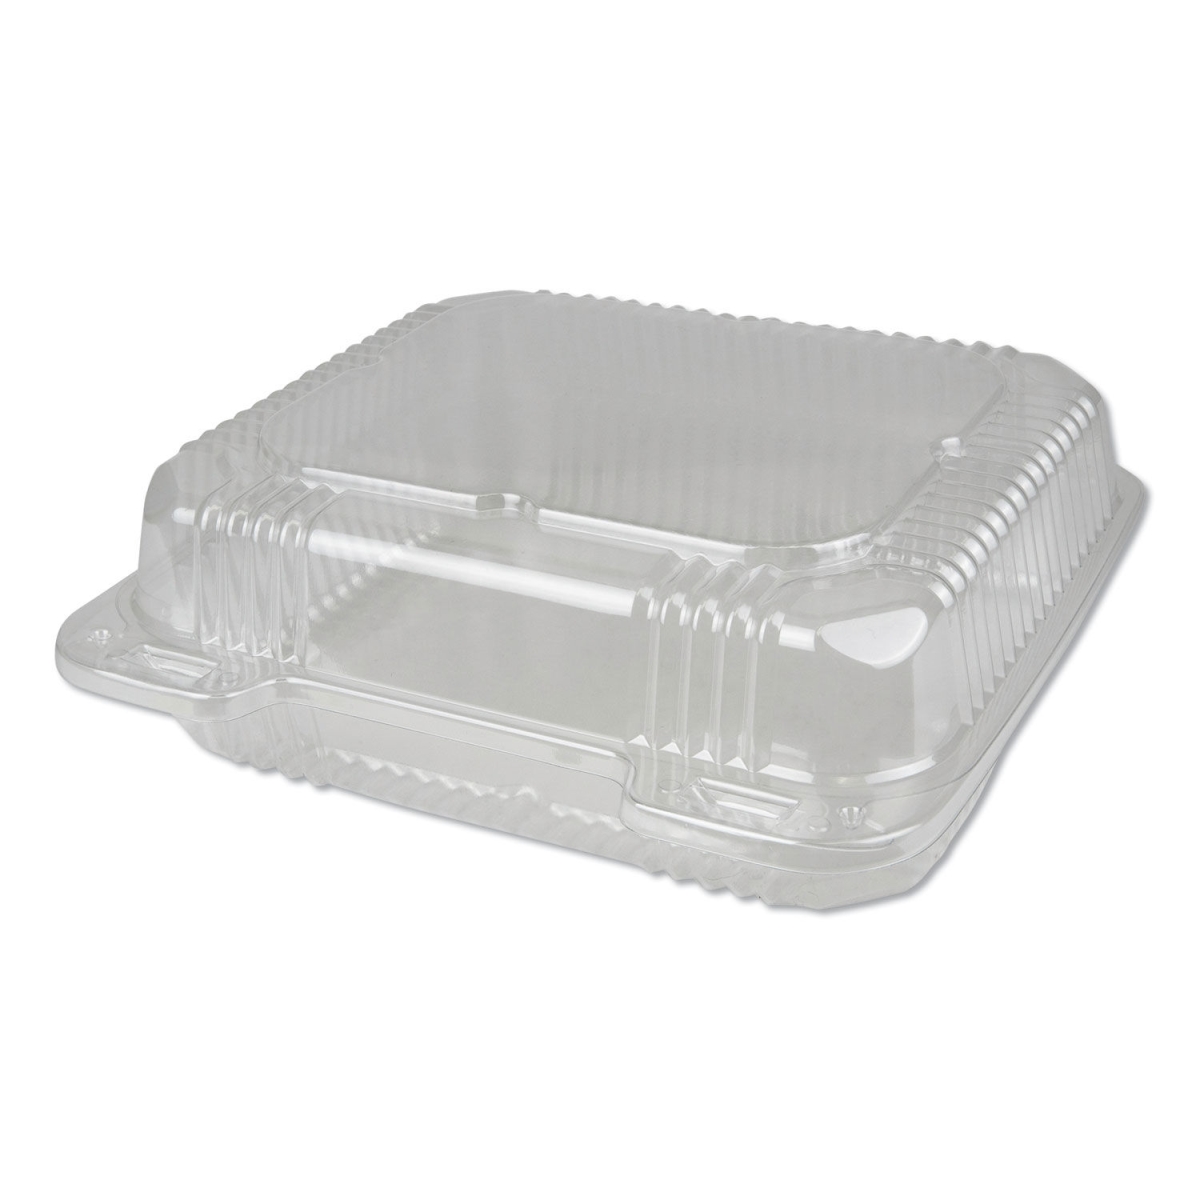 Dpkpxt880 50 Oz 8 X 8 In. Hinged Container, Clear